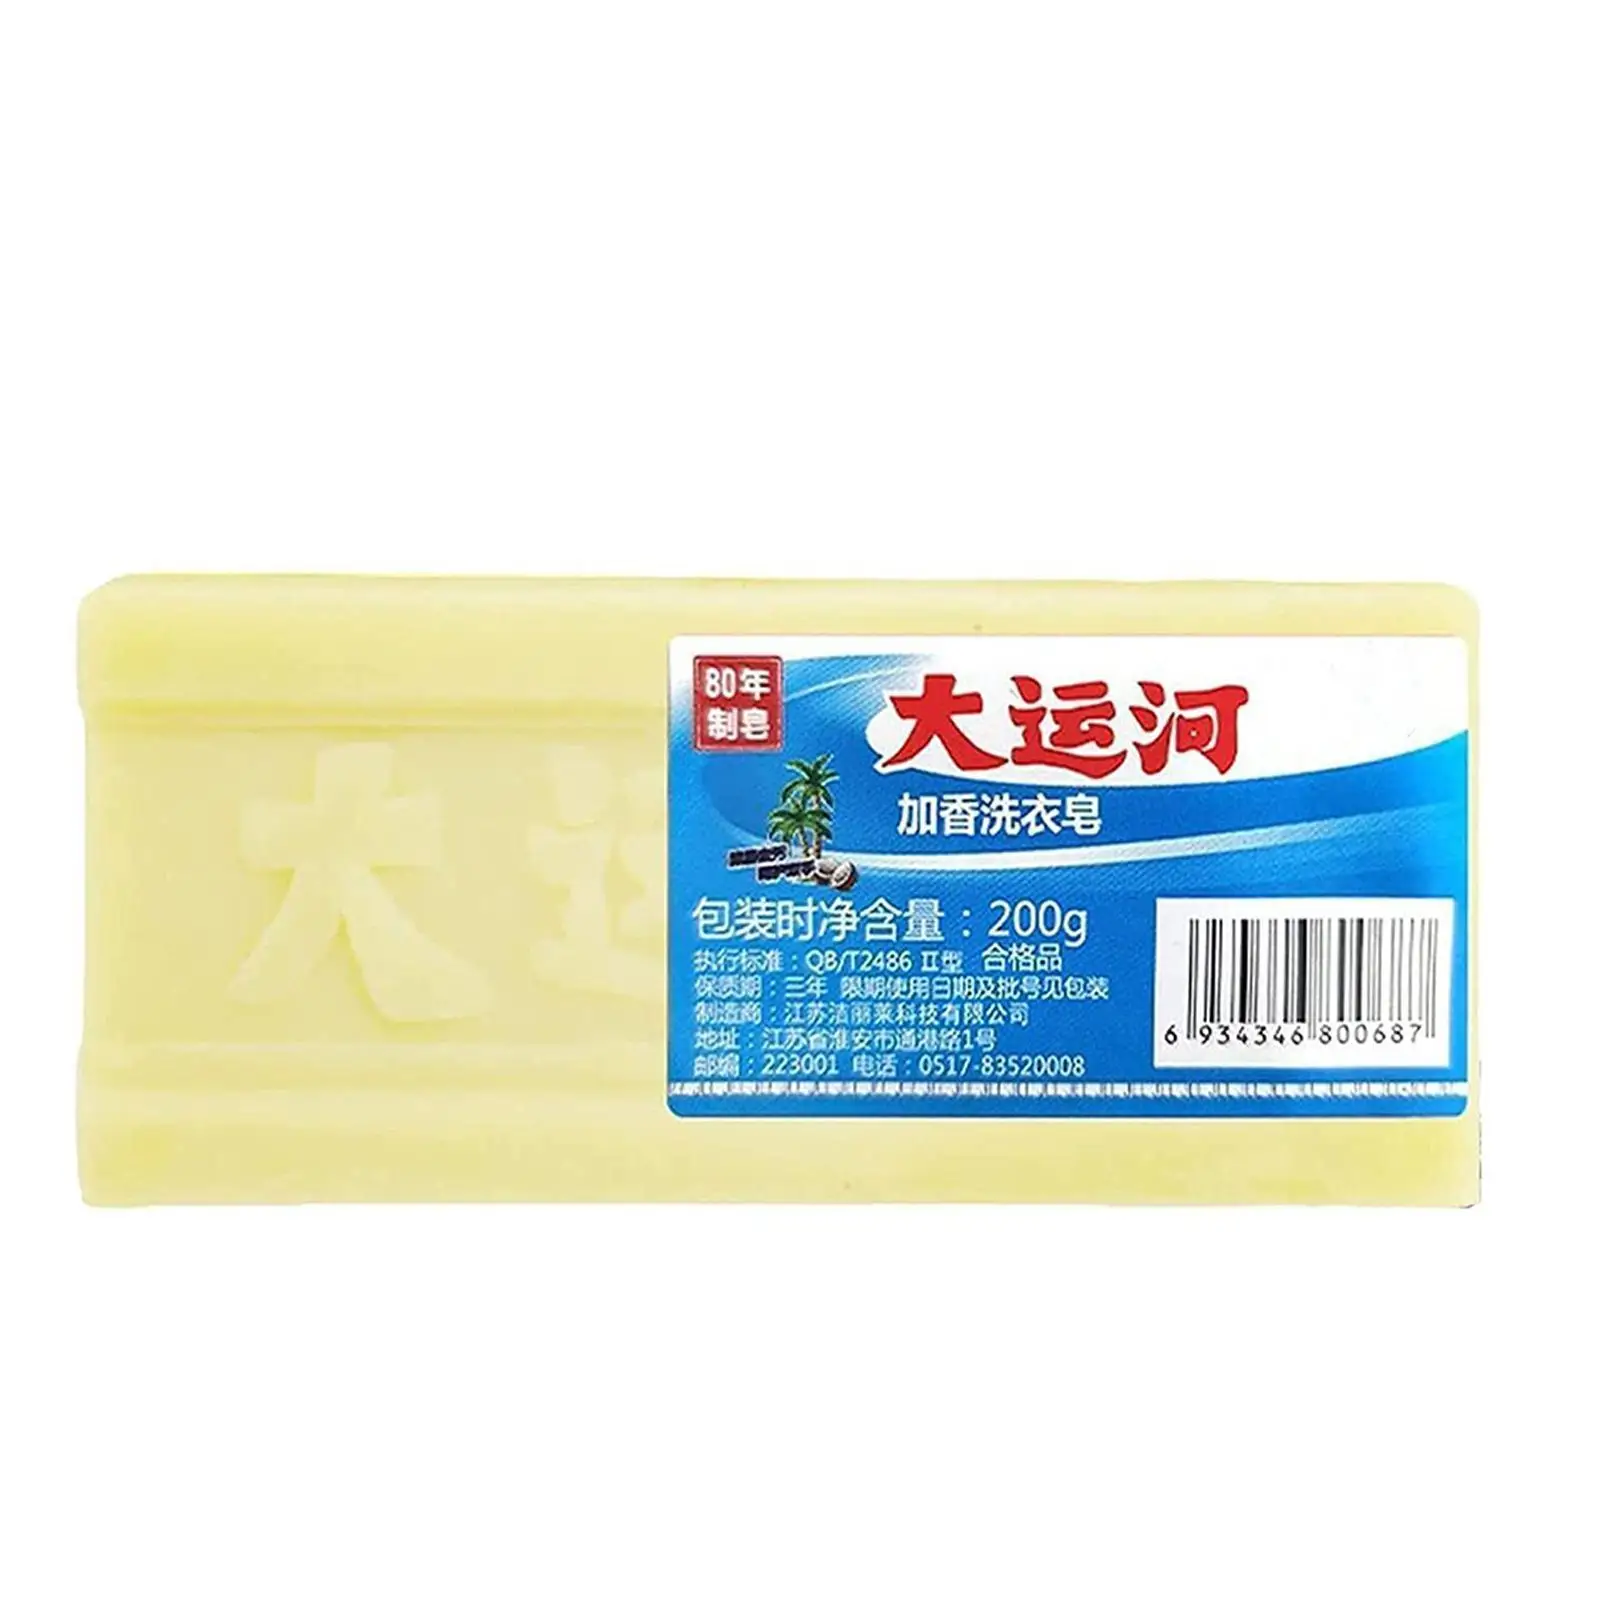 

Soap Laundry Multipurpose Wash Thoroughly No Stains Decontamination Strong Floral Ability Left Fragrance X7G9